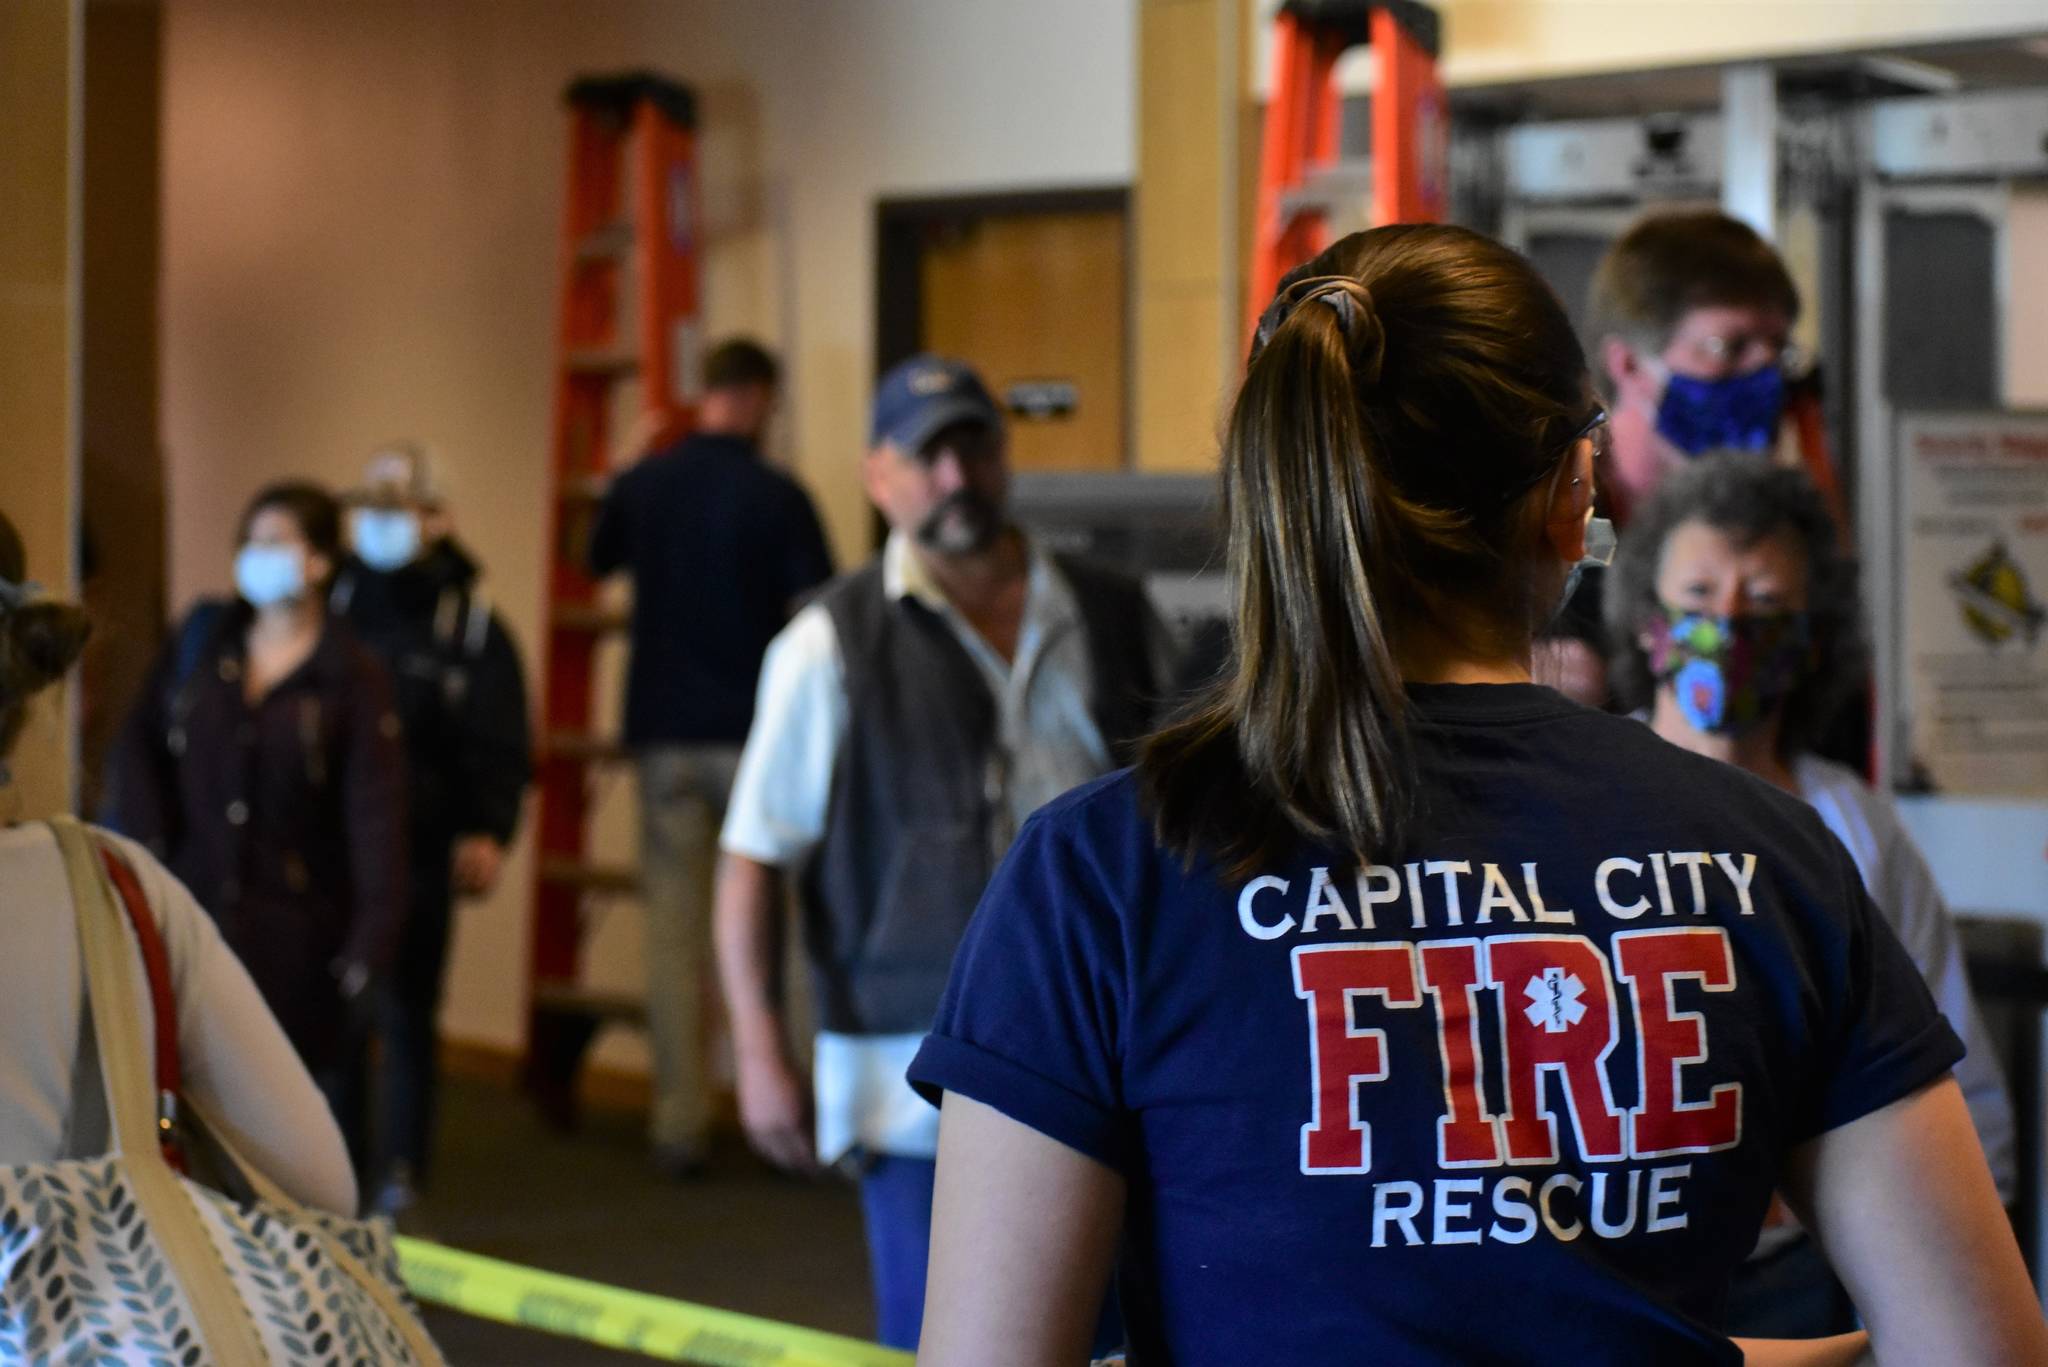 A member of Capital City Fire/Rescue’s Airport Screening Task Force greets passengers disembarking from a flight arriving at the Juneau International Airport on Wednesday, May 27, 2020. (Peter Segall | Juneau Empire)